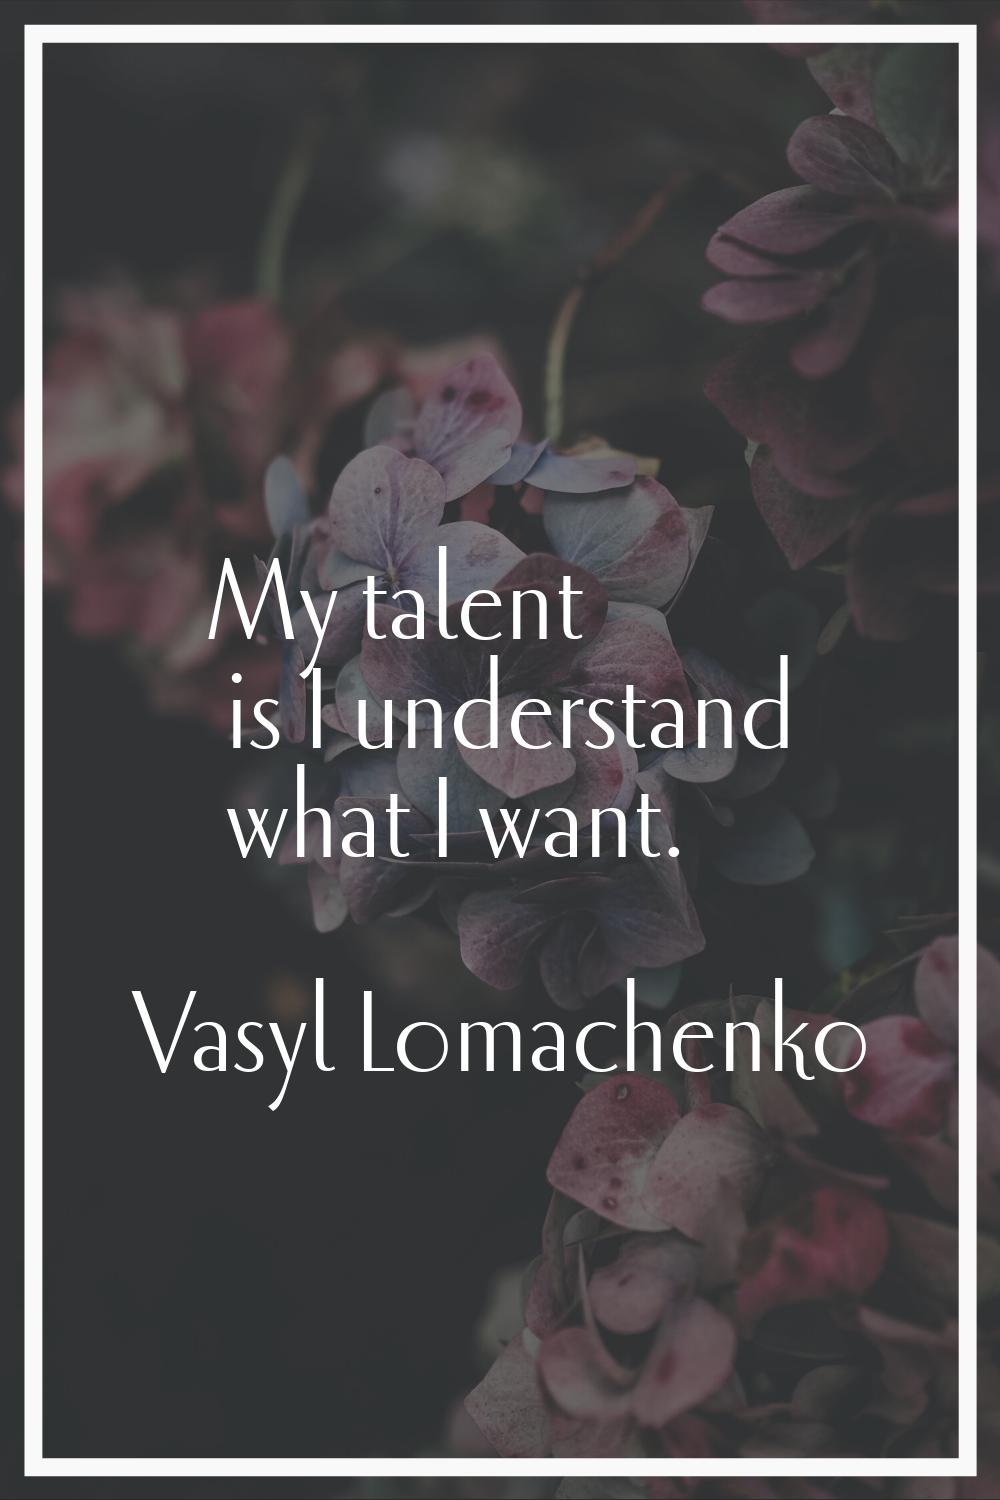 My talent is I understand what I want.